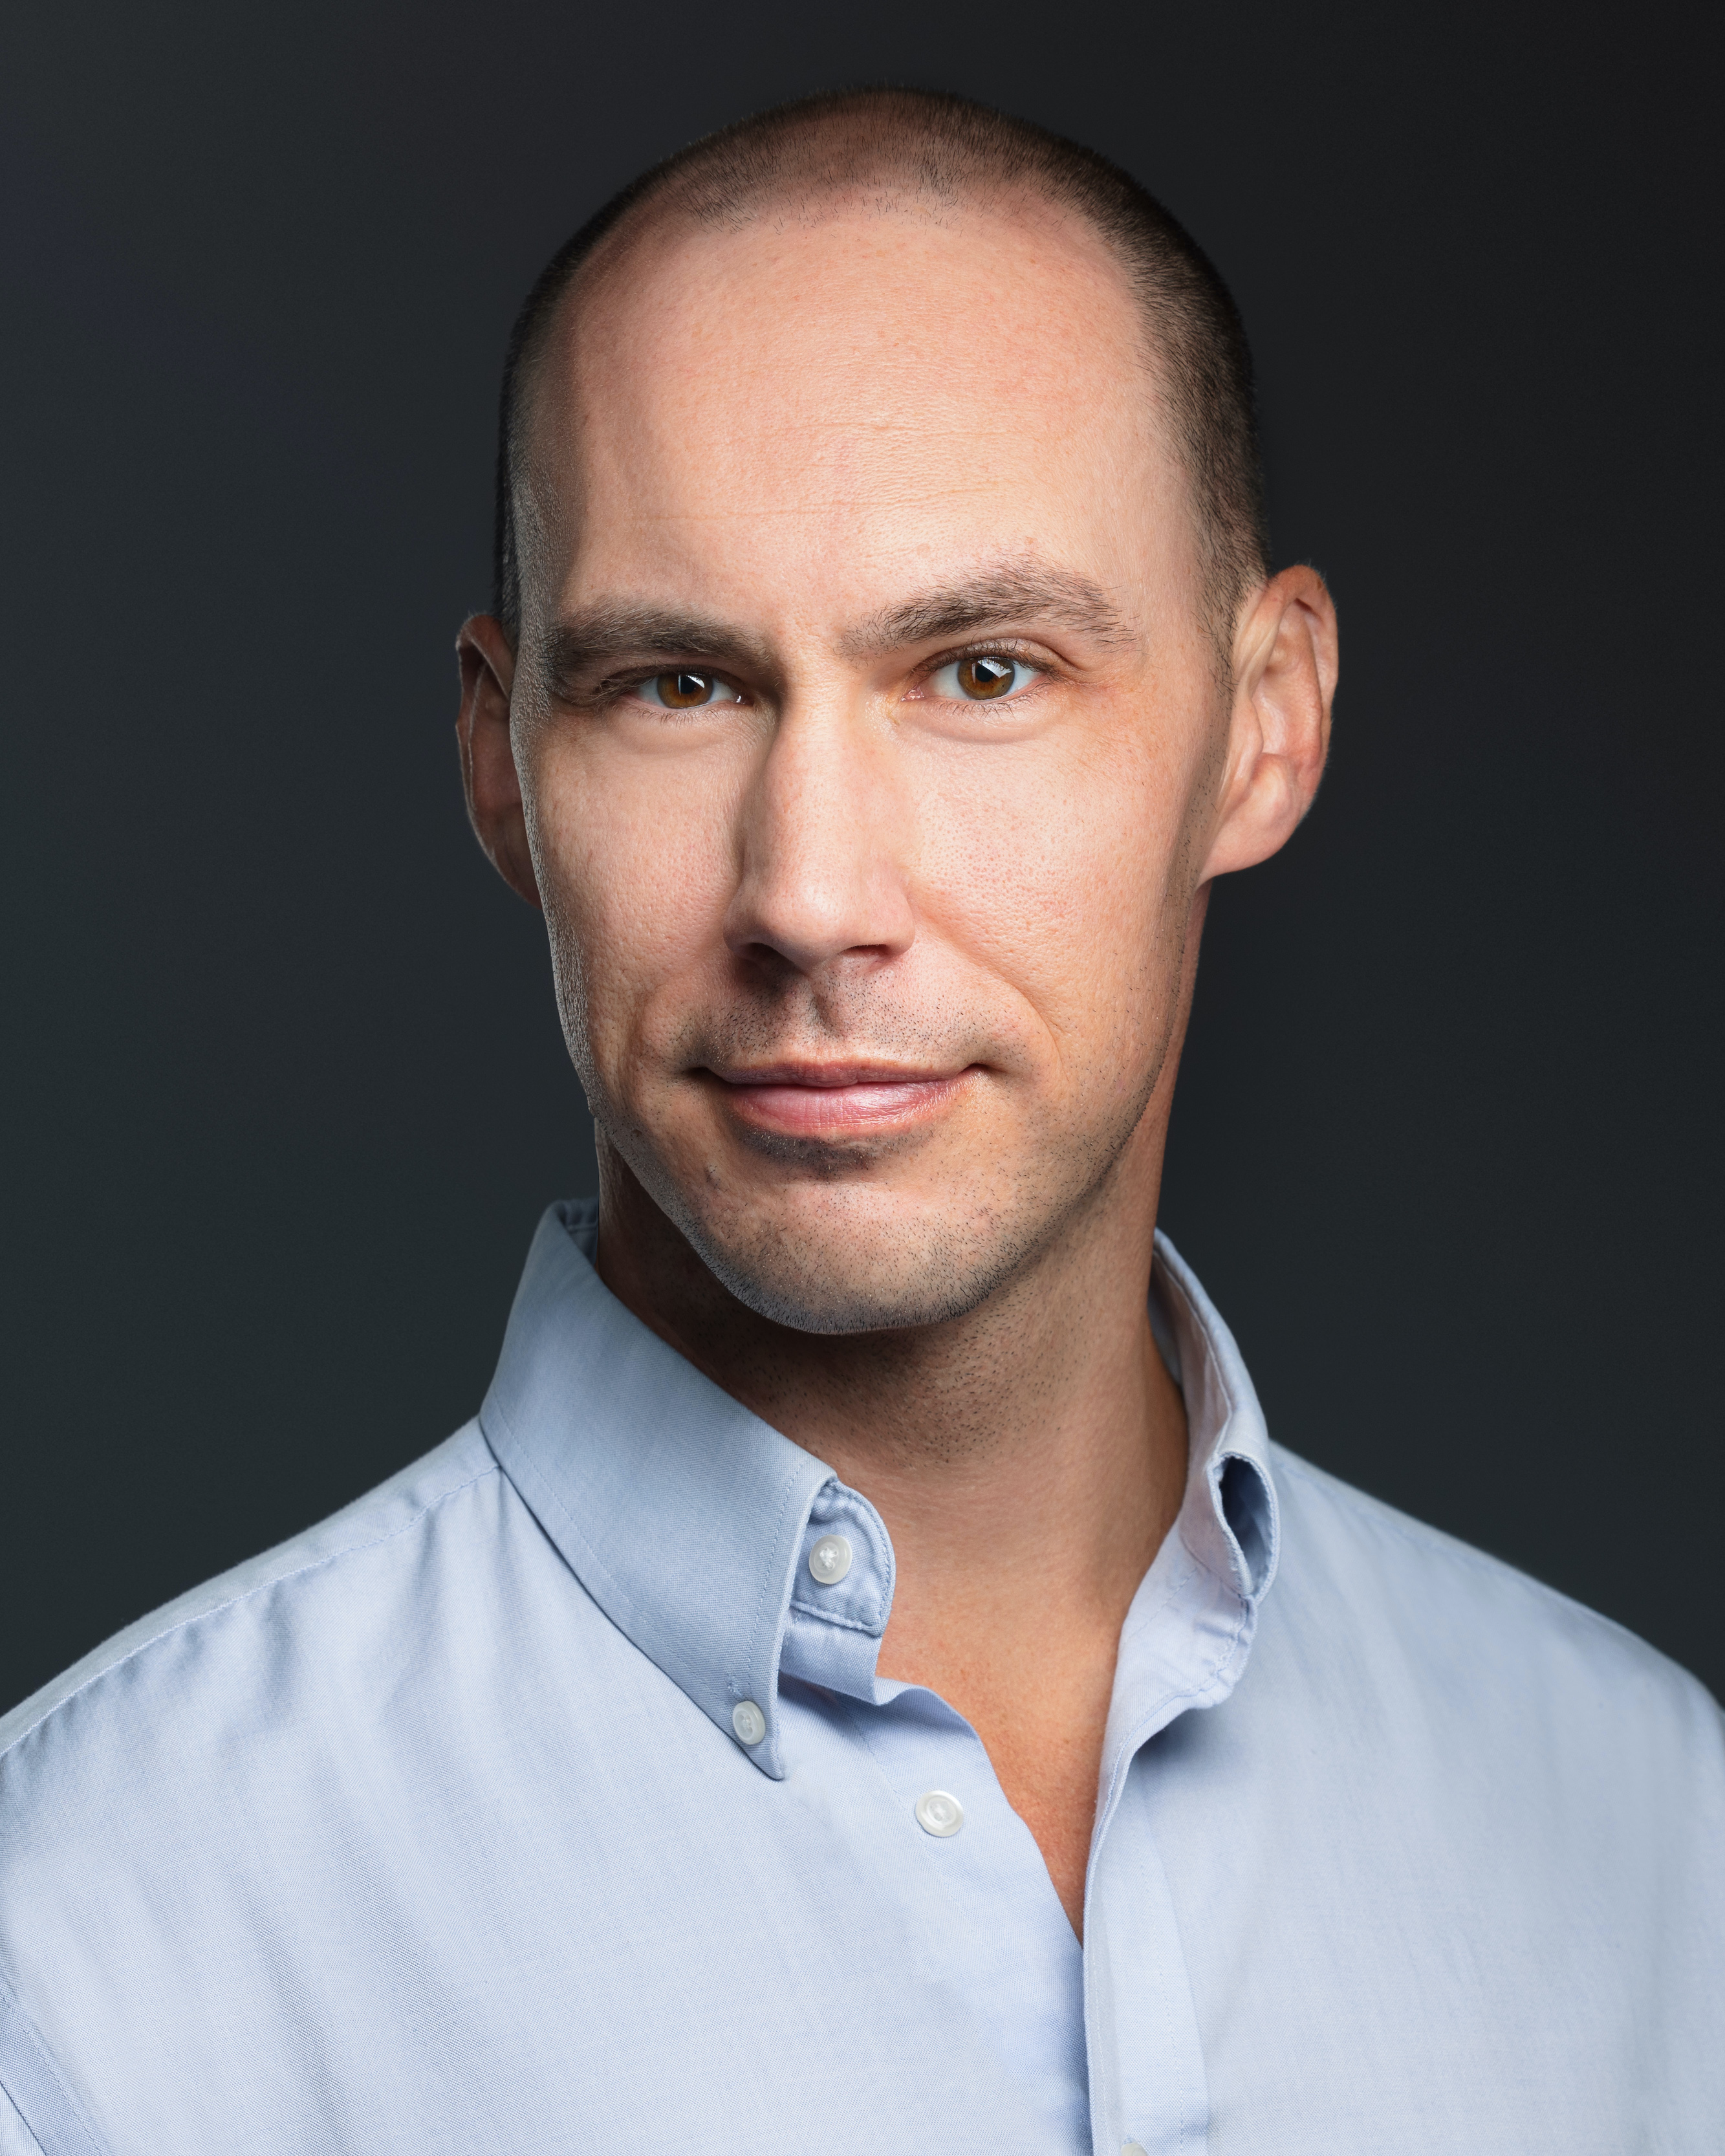 A headshot photo of a man with a shaved head, wearing a light blue button up shirt.